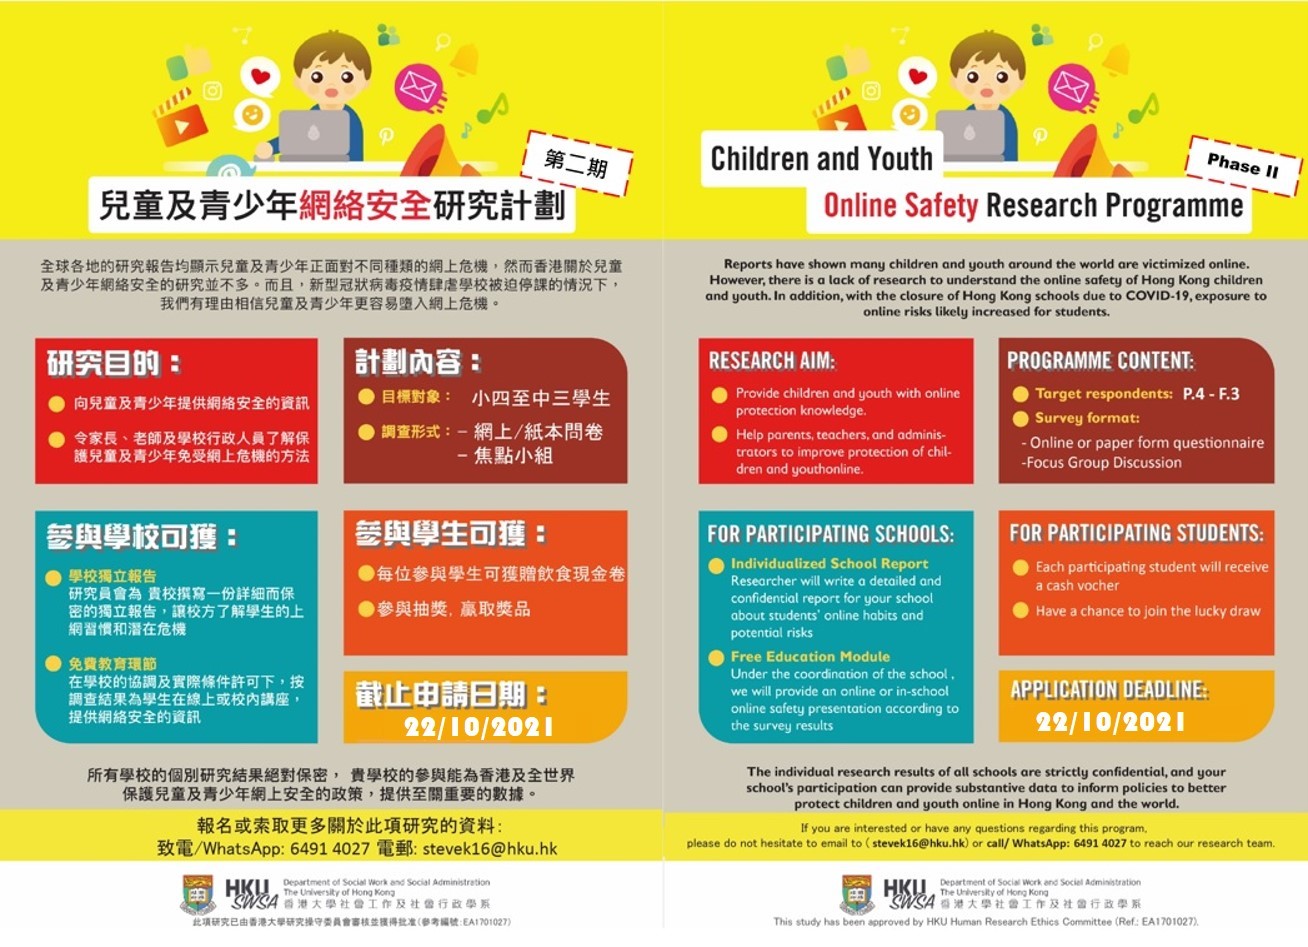 Children and Youth Online Safety Programme